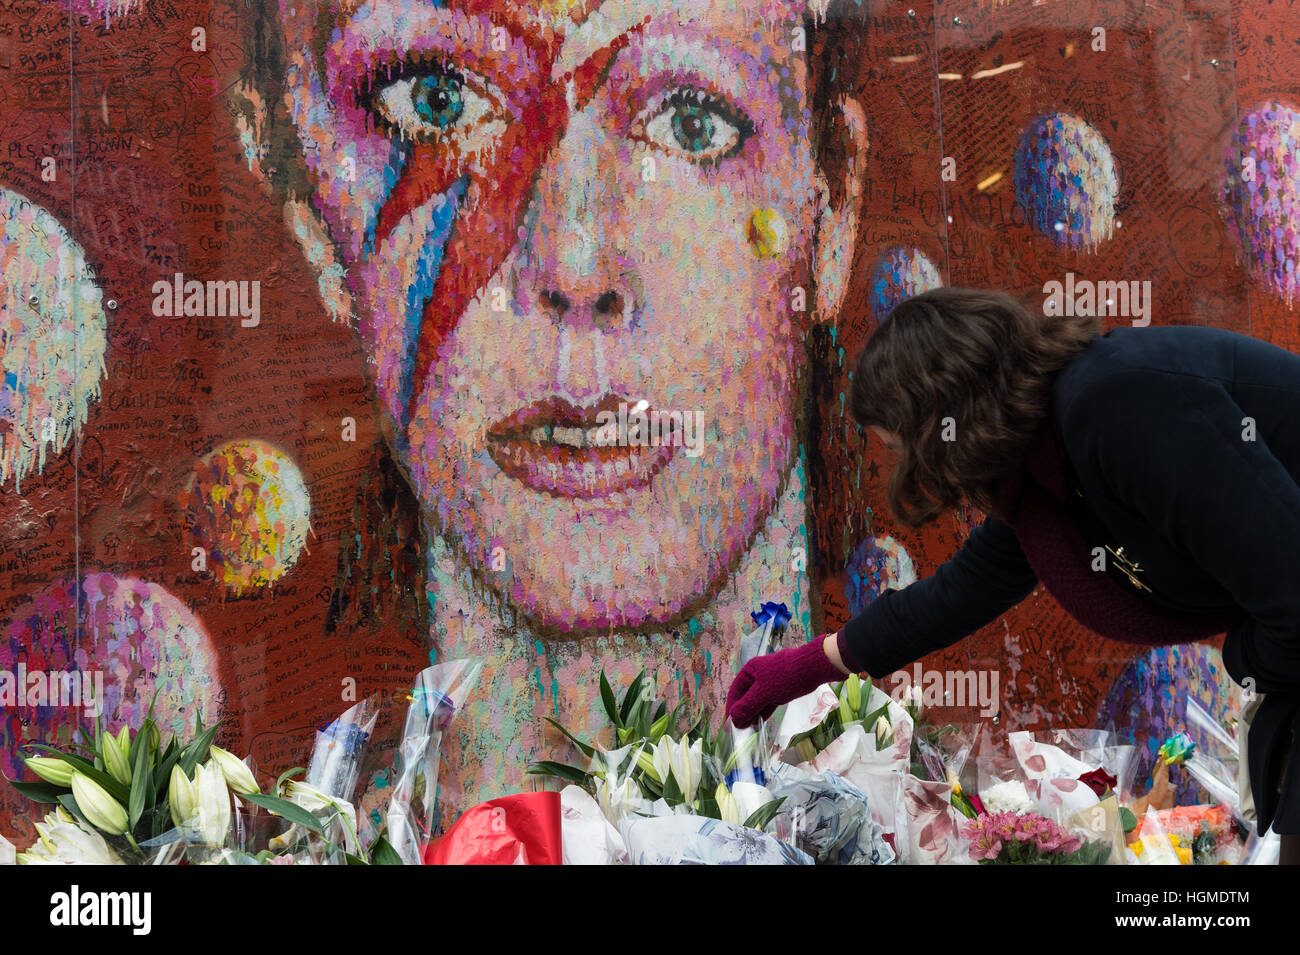 London, UK. 10th January 2017. Fans gather by the mural of David Bowie in artist's birthplace of Brixton to commemorate the first anniversary of musician's death. Brixton's mural which depicts Bowie's face from Aladdin Sane album cover became the major memorial site after the star's death on 10 January 2016. Wiktor Szymanowicz/Alamy Live News Stock Photo